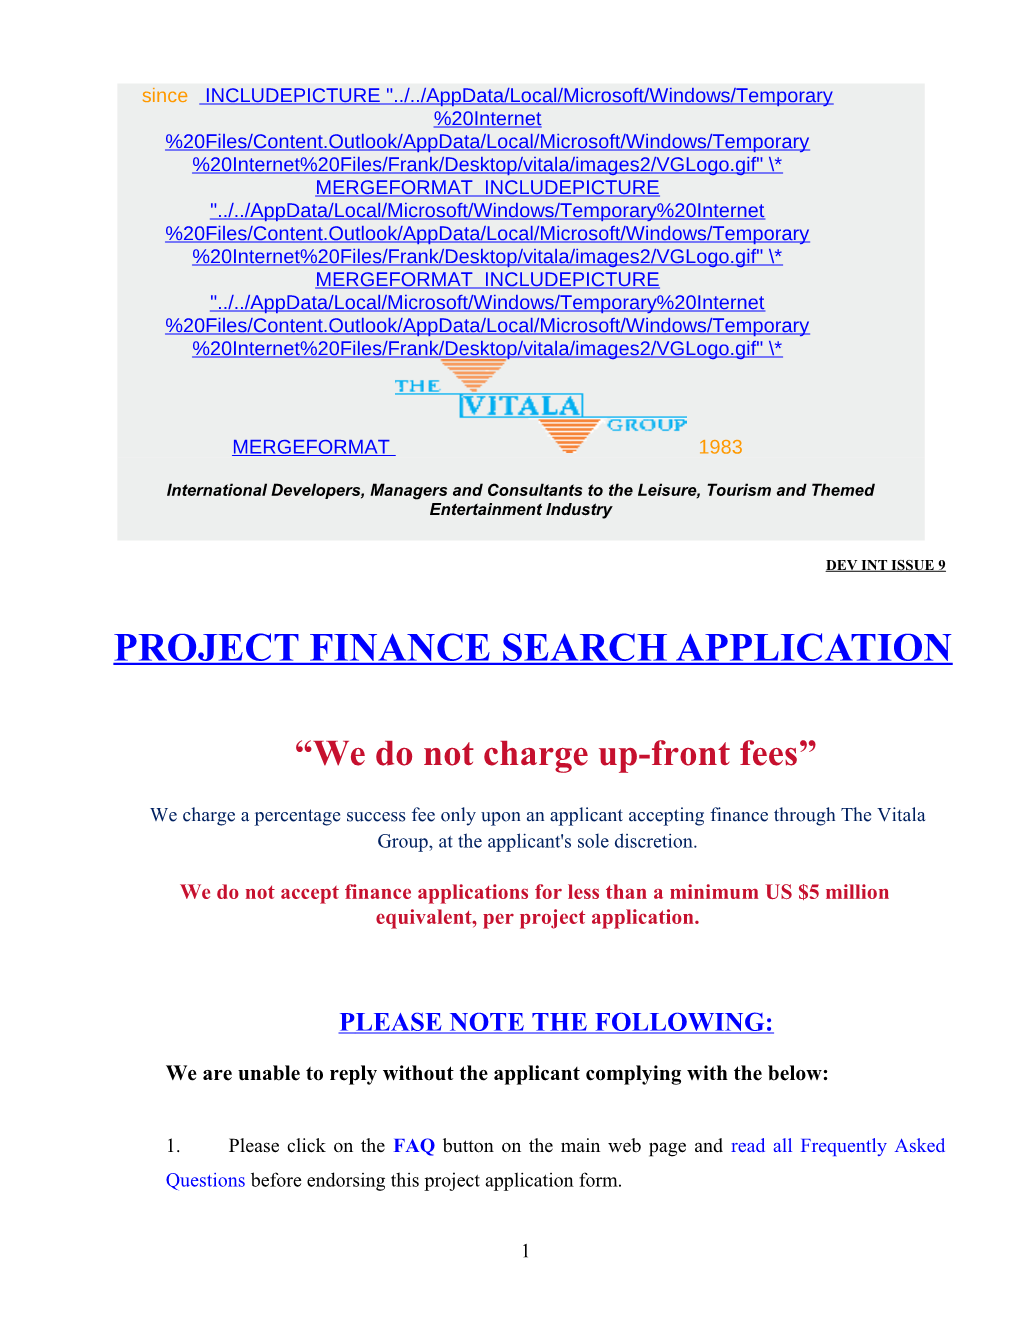 Project Finance Search Application